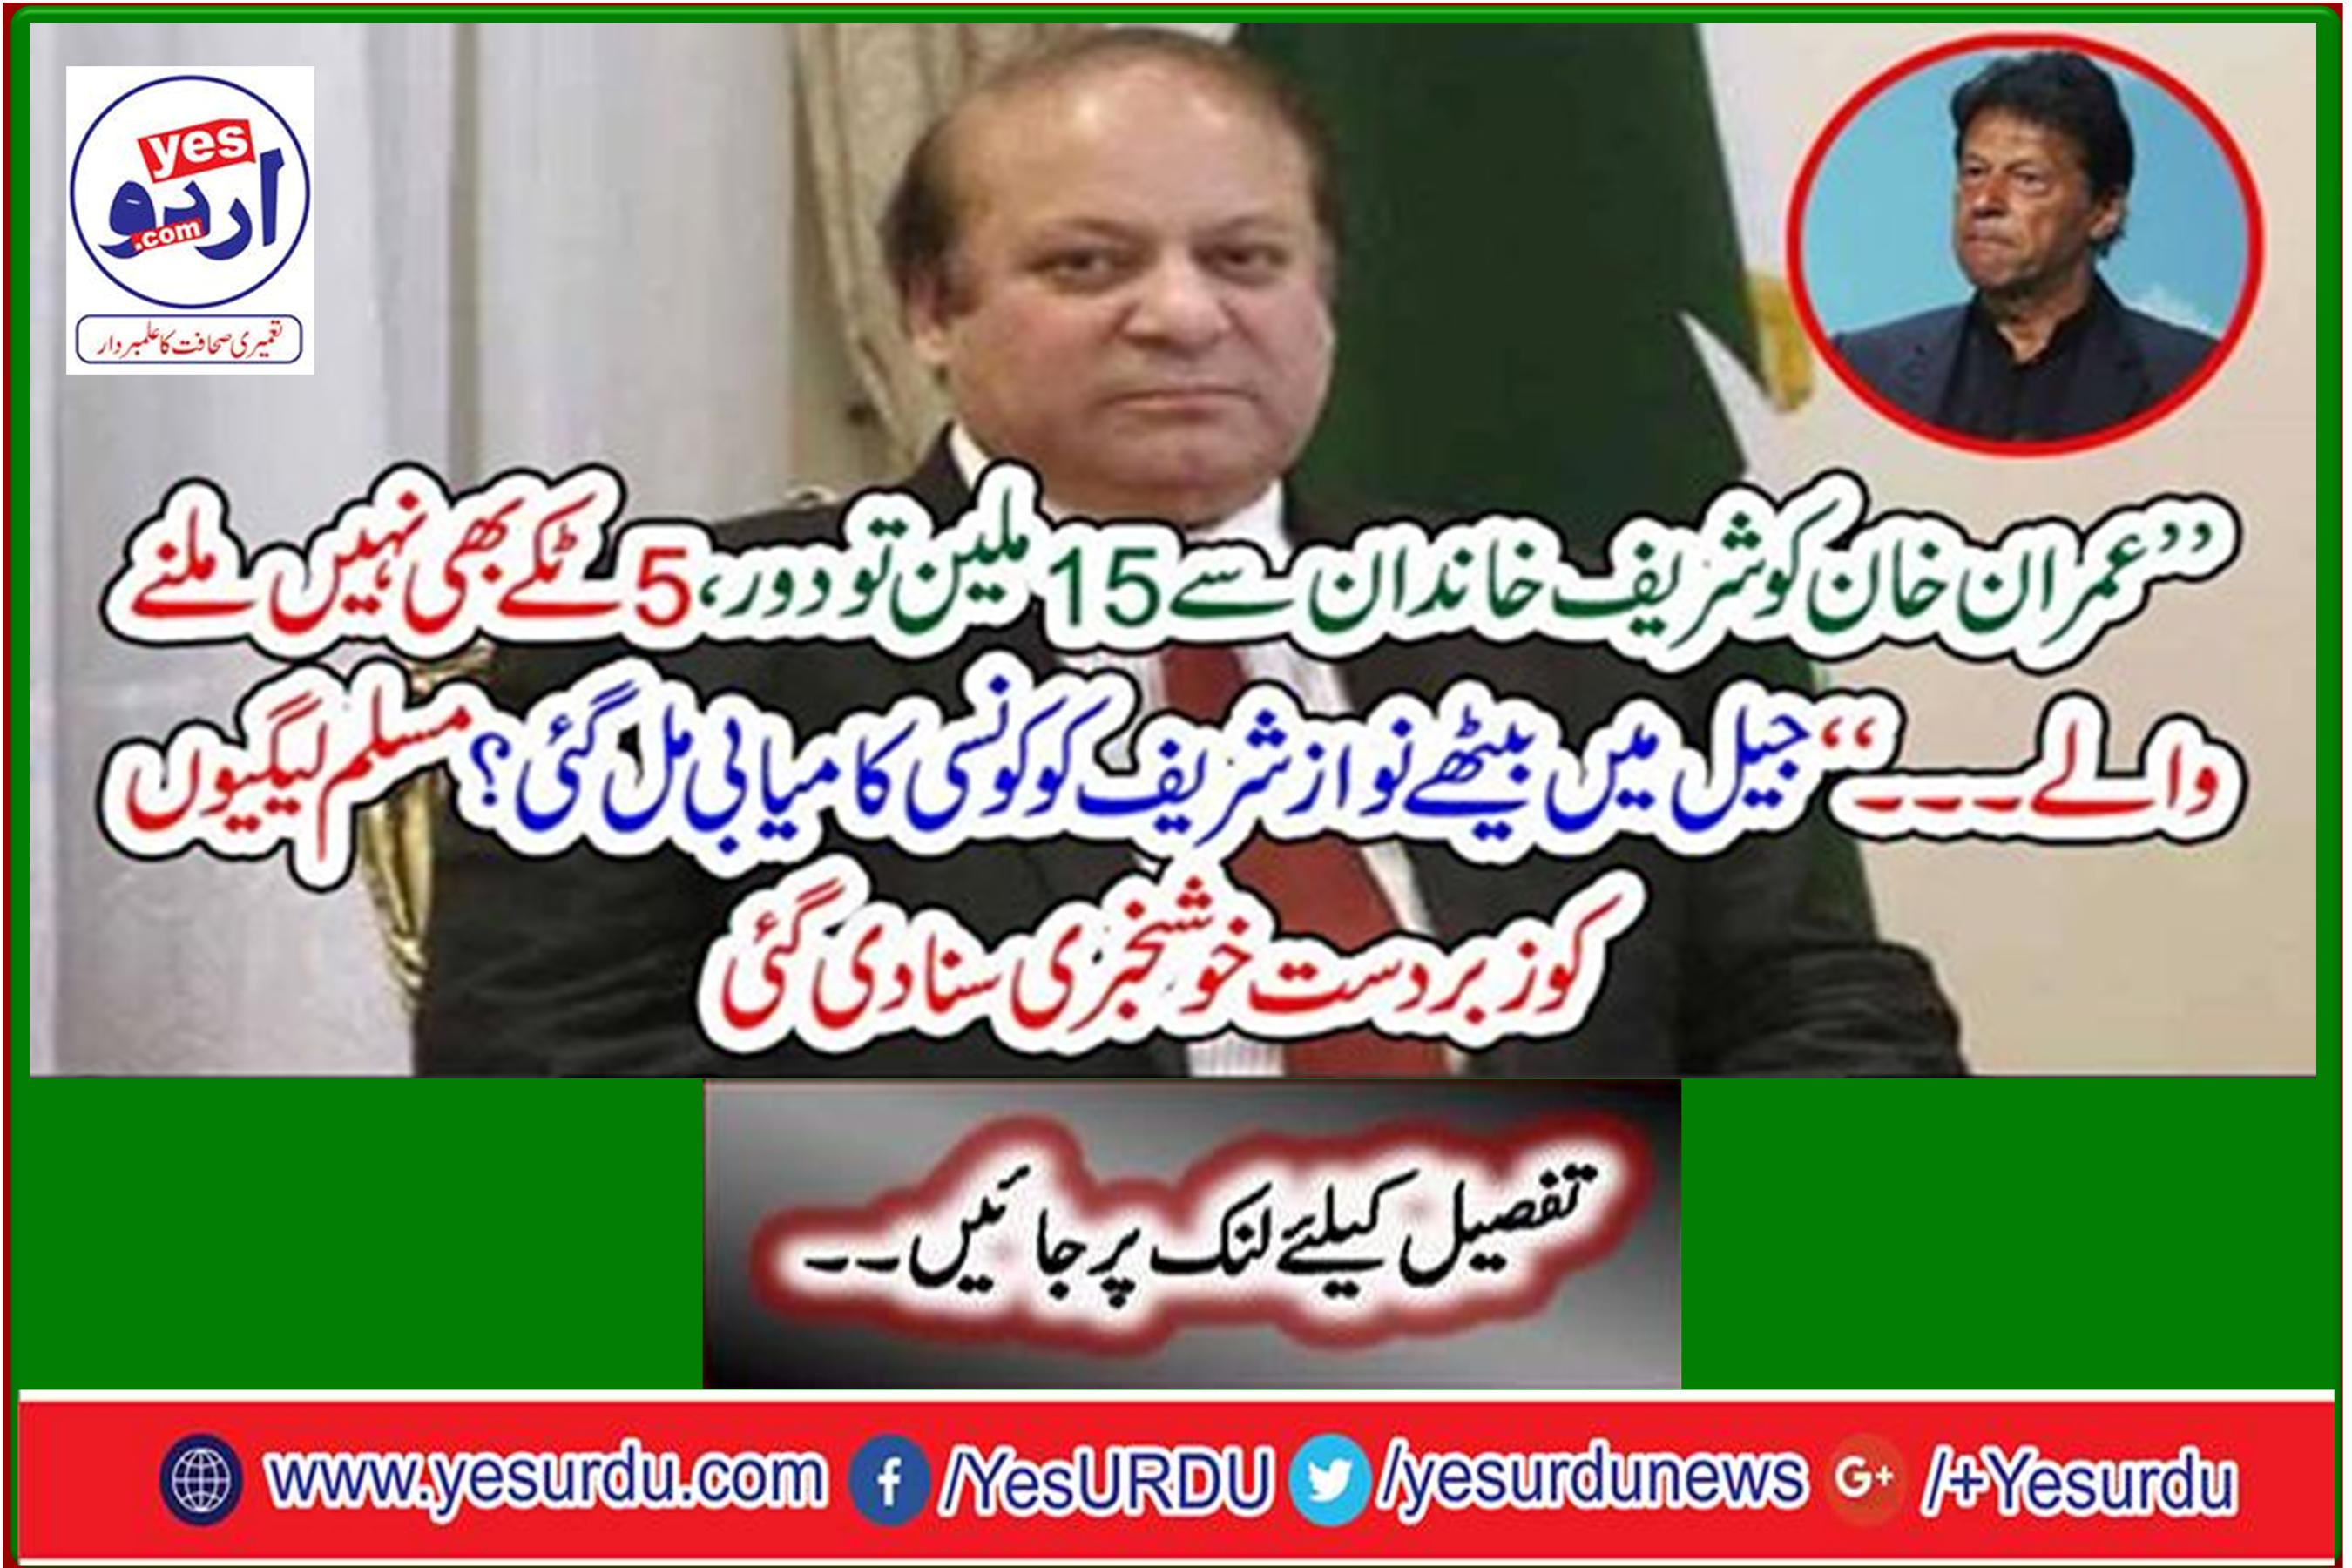 What success did Nawaz Sharif get while in jail? Great news was heard on Muslim legions